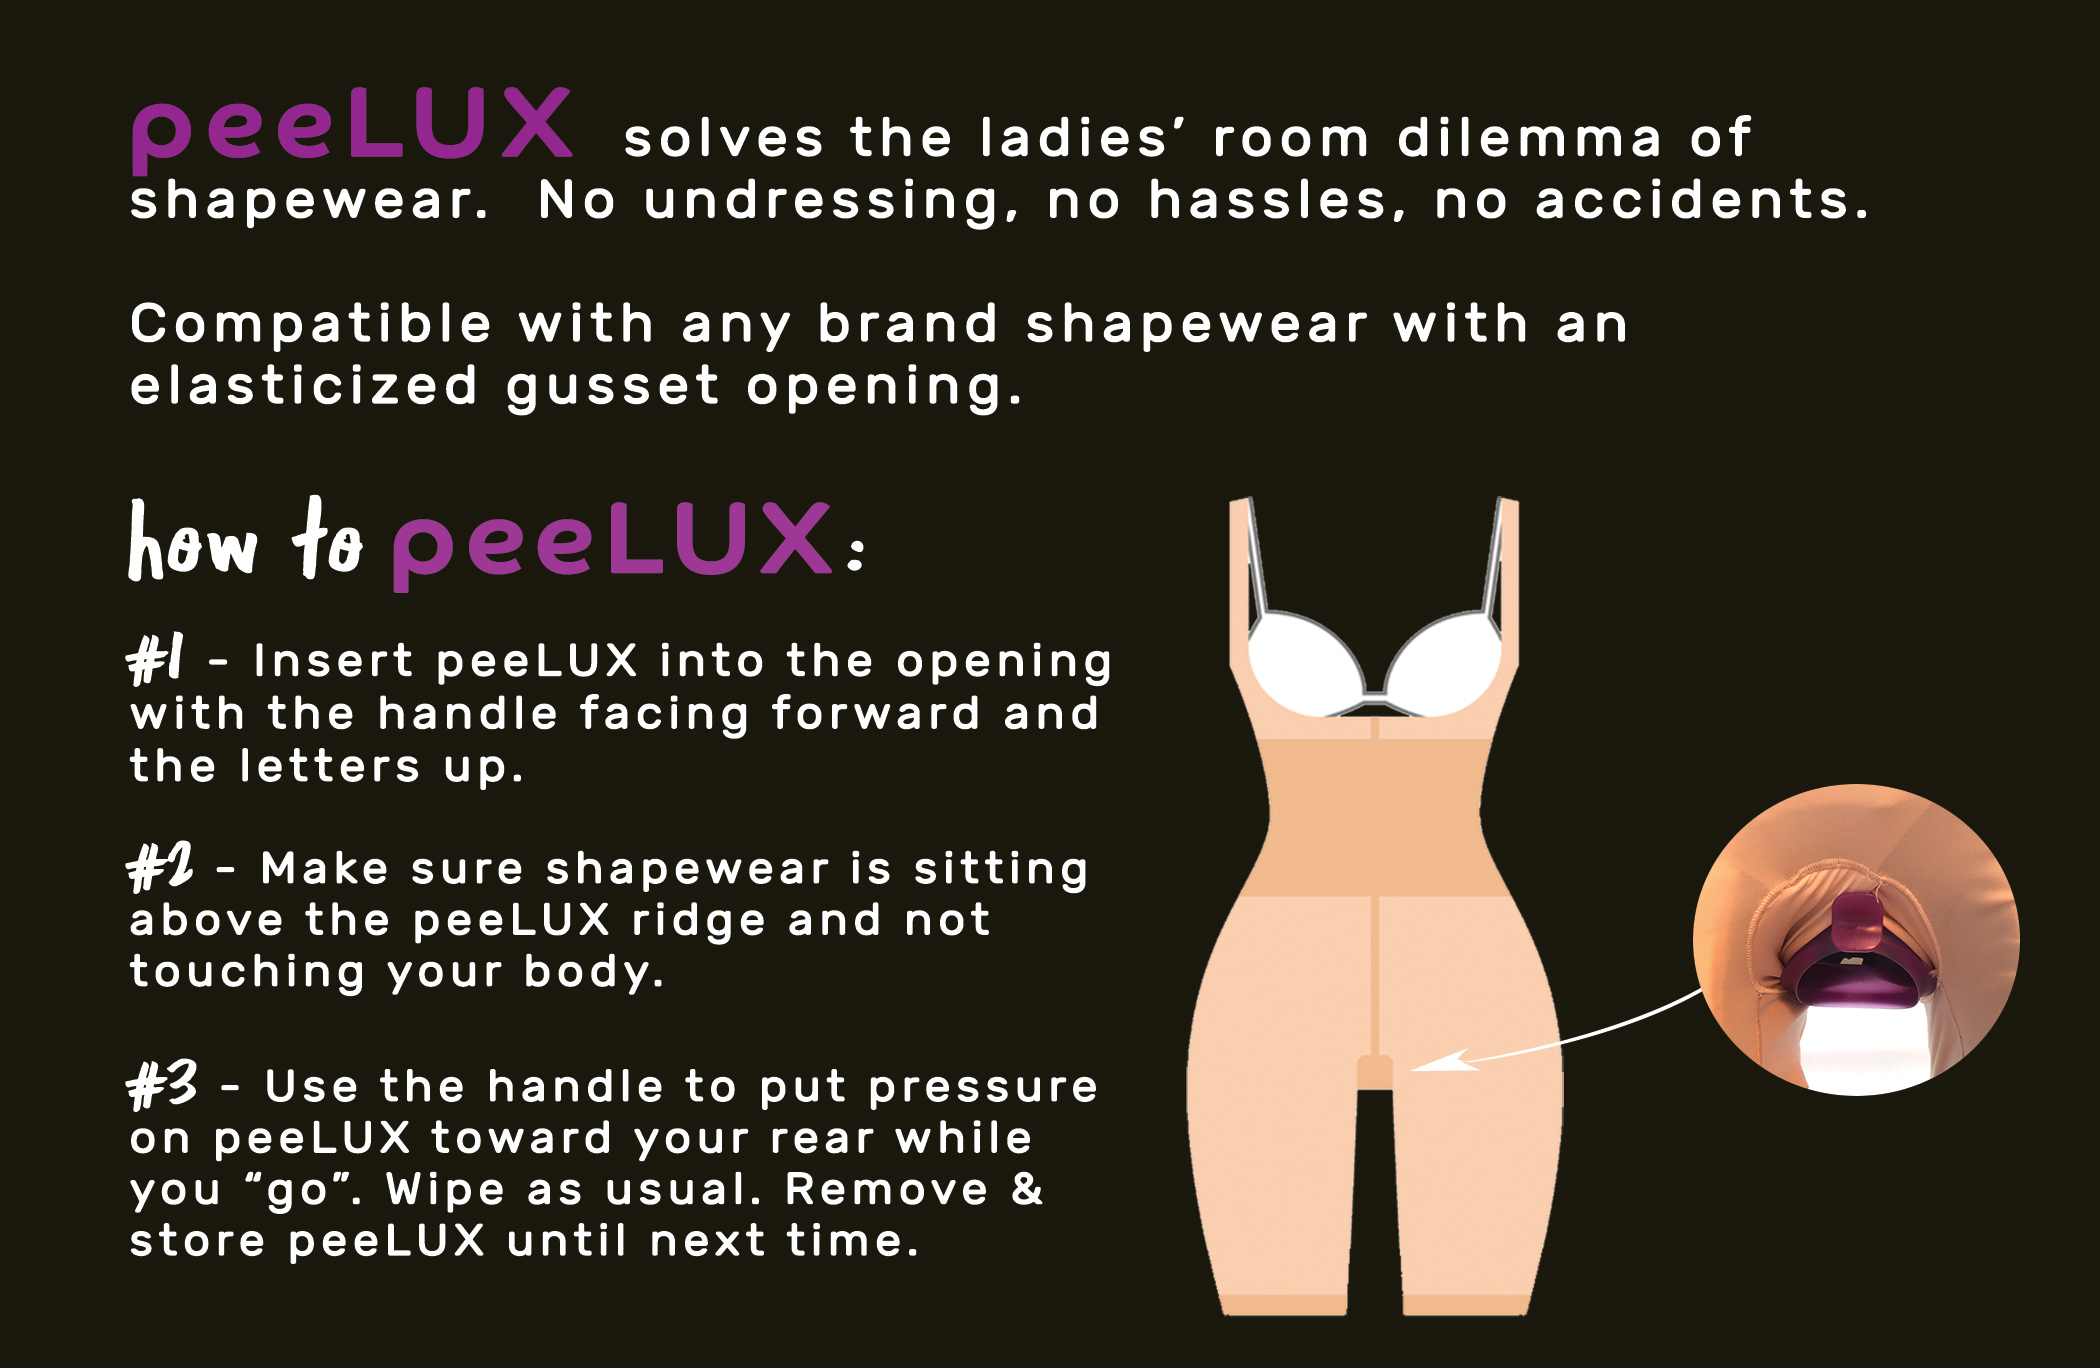 9 Simple Ways to Know Your Spanx Size - wikiHow